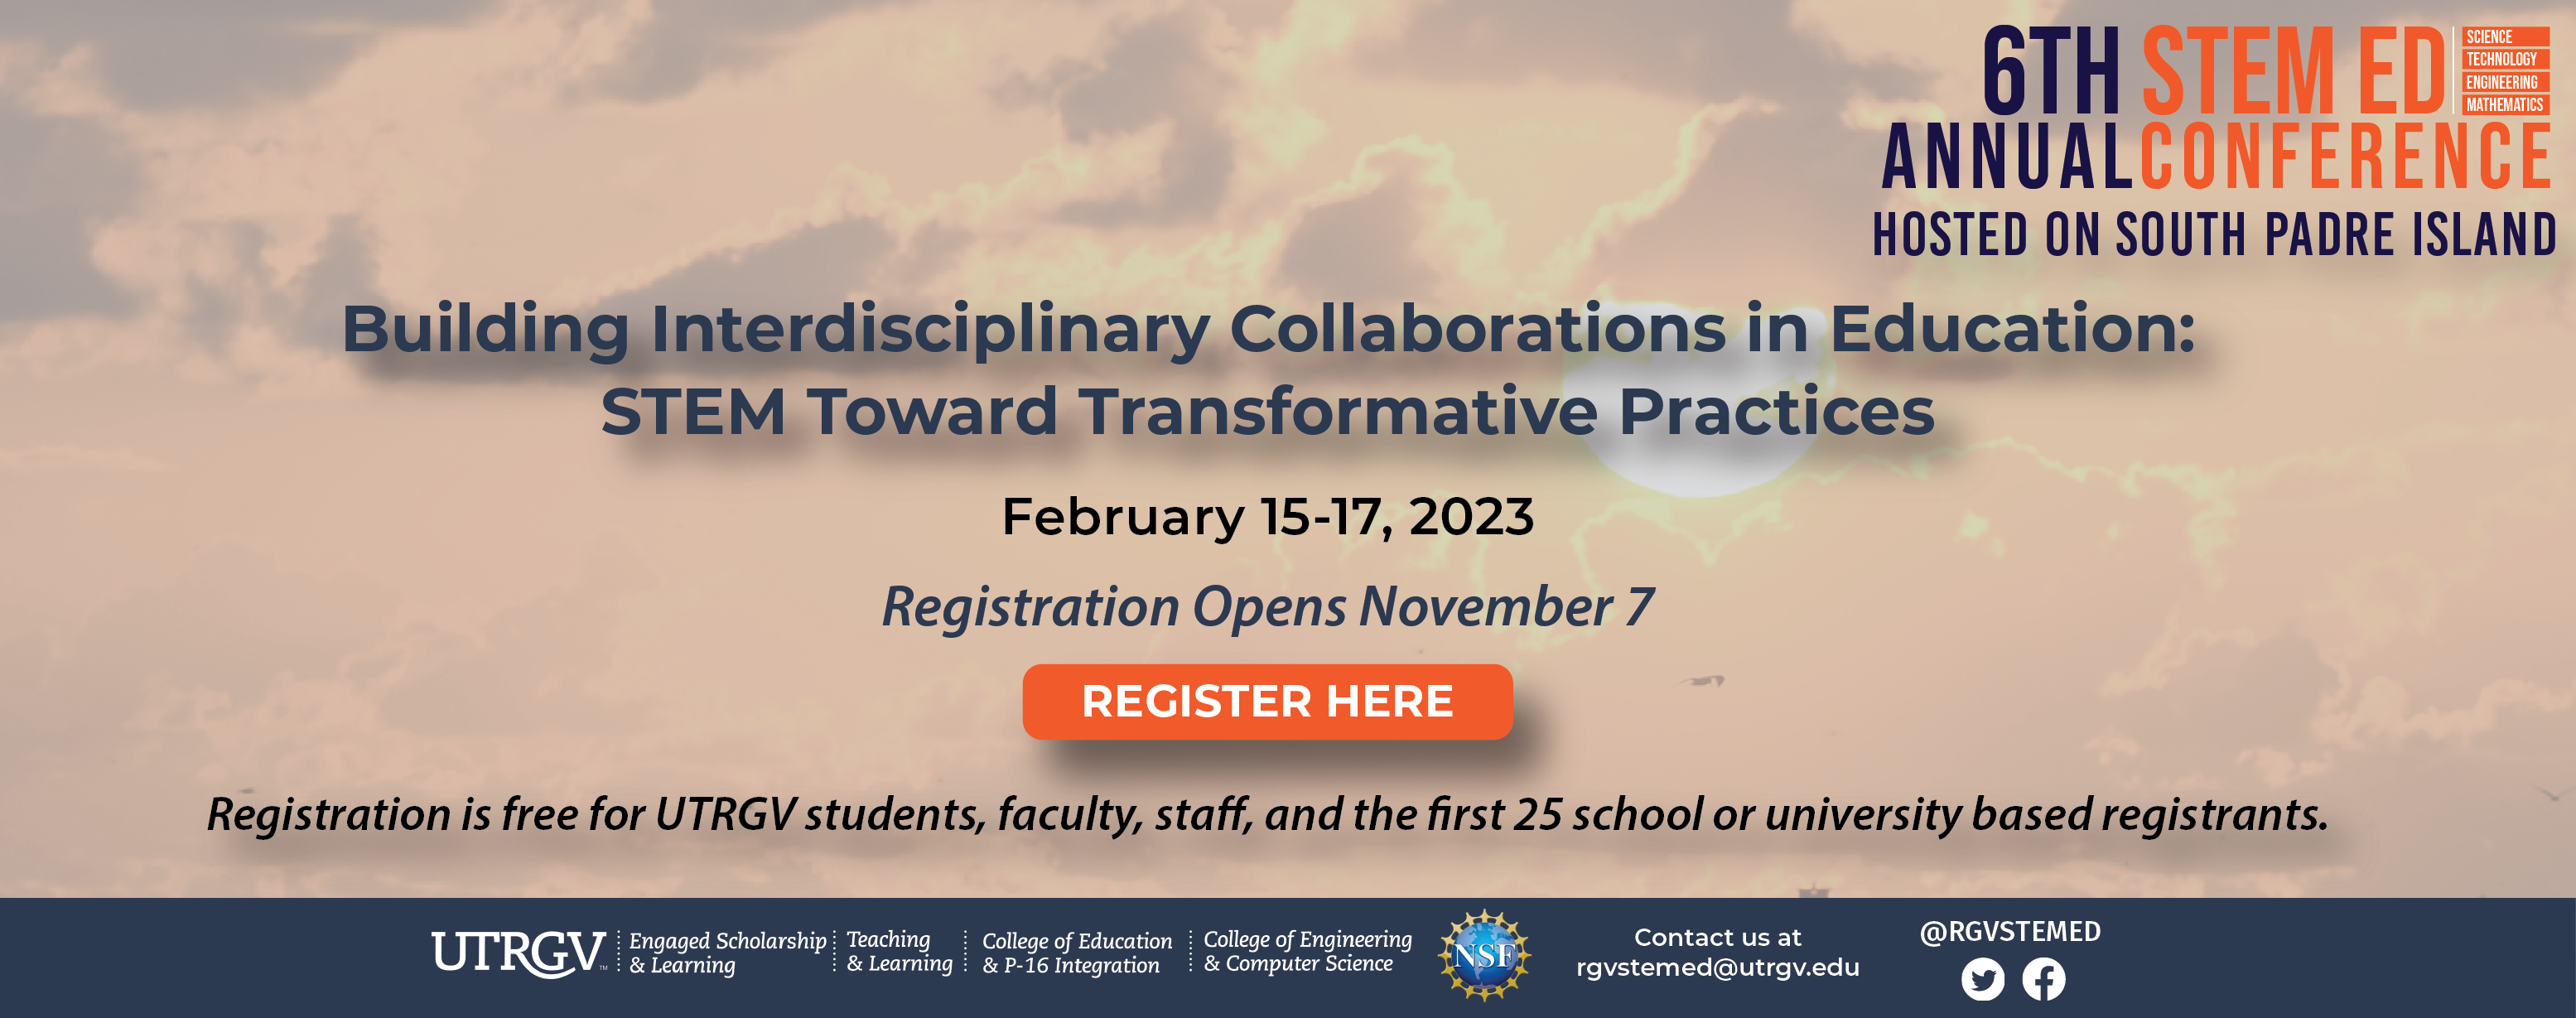 Registration for the 6th Stem Ed Annual Conference is now open!